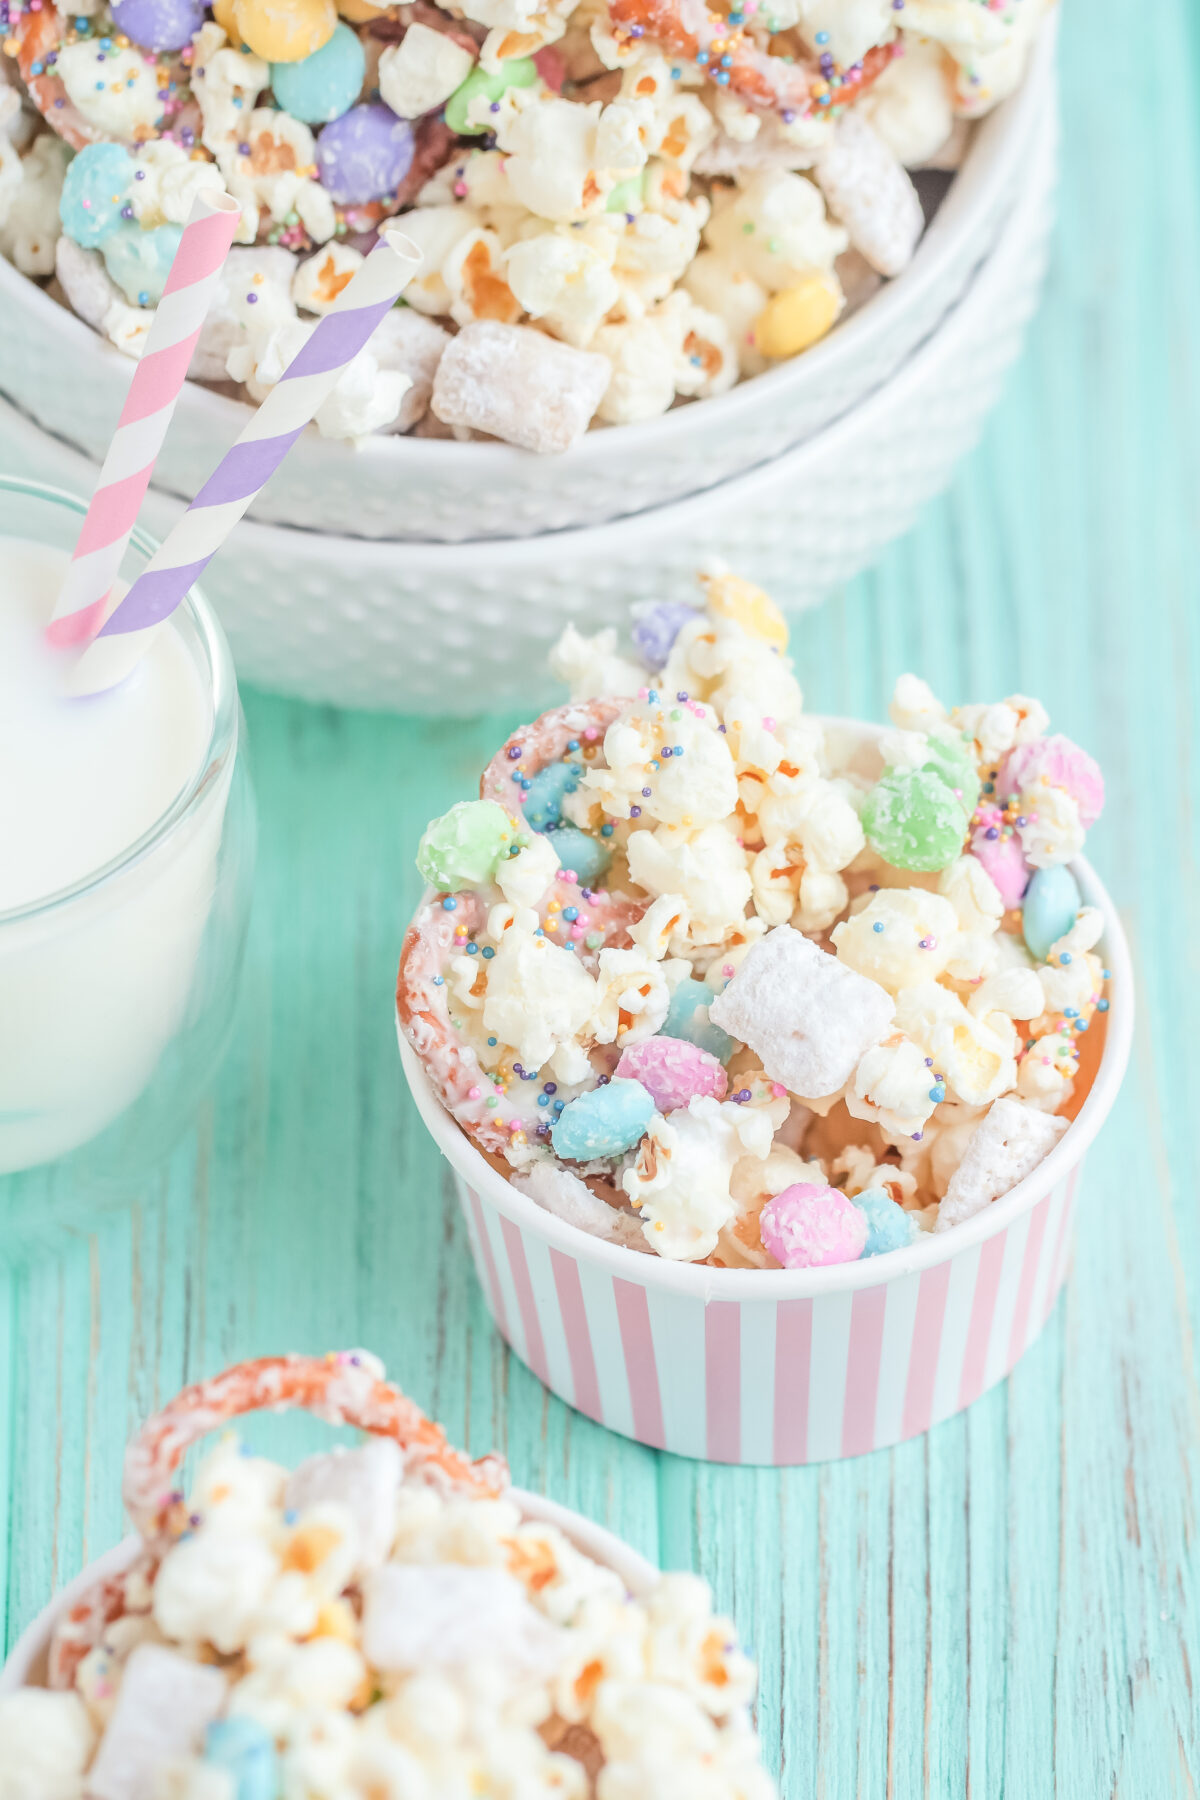 Make this Bunny Bait recipe this Easter, everyone will love this Easter snack mix featuring popcorn, muddy buddies, and loads of chocolate!